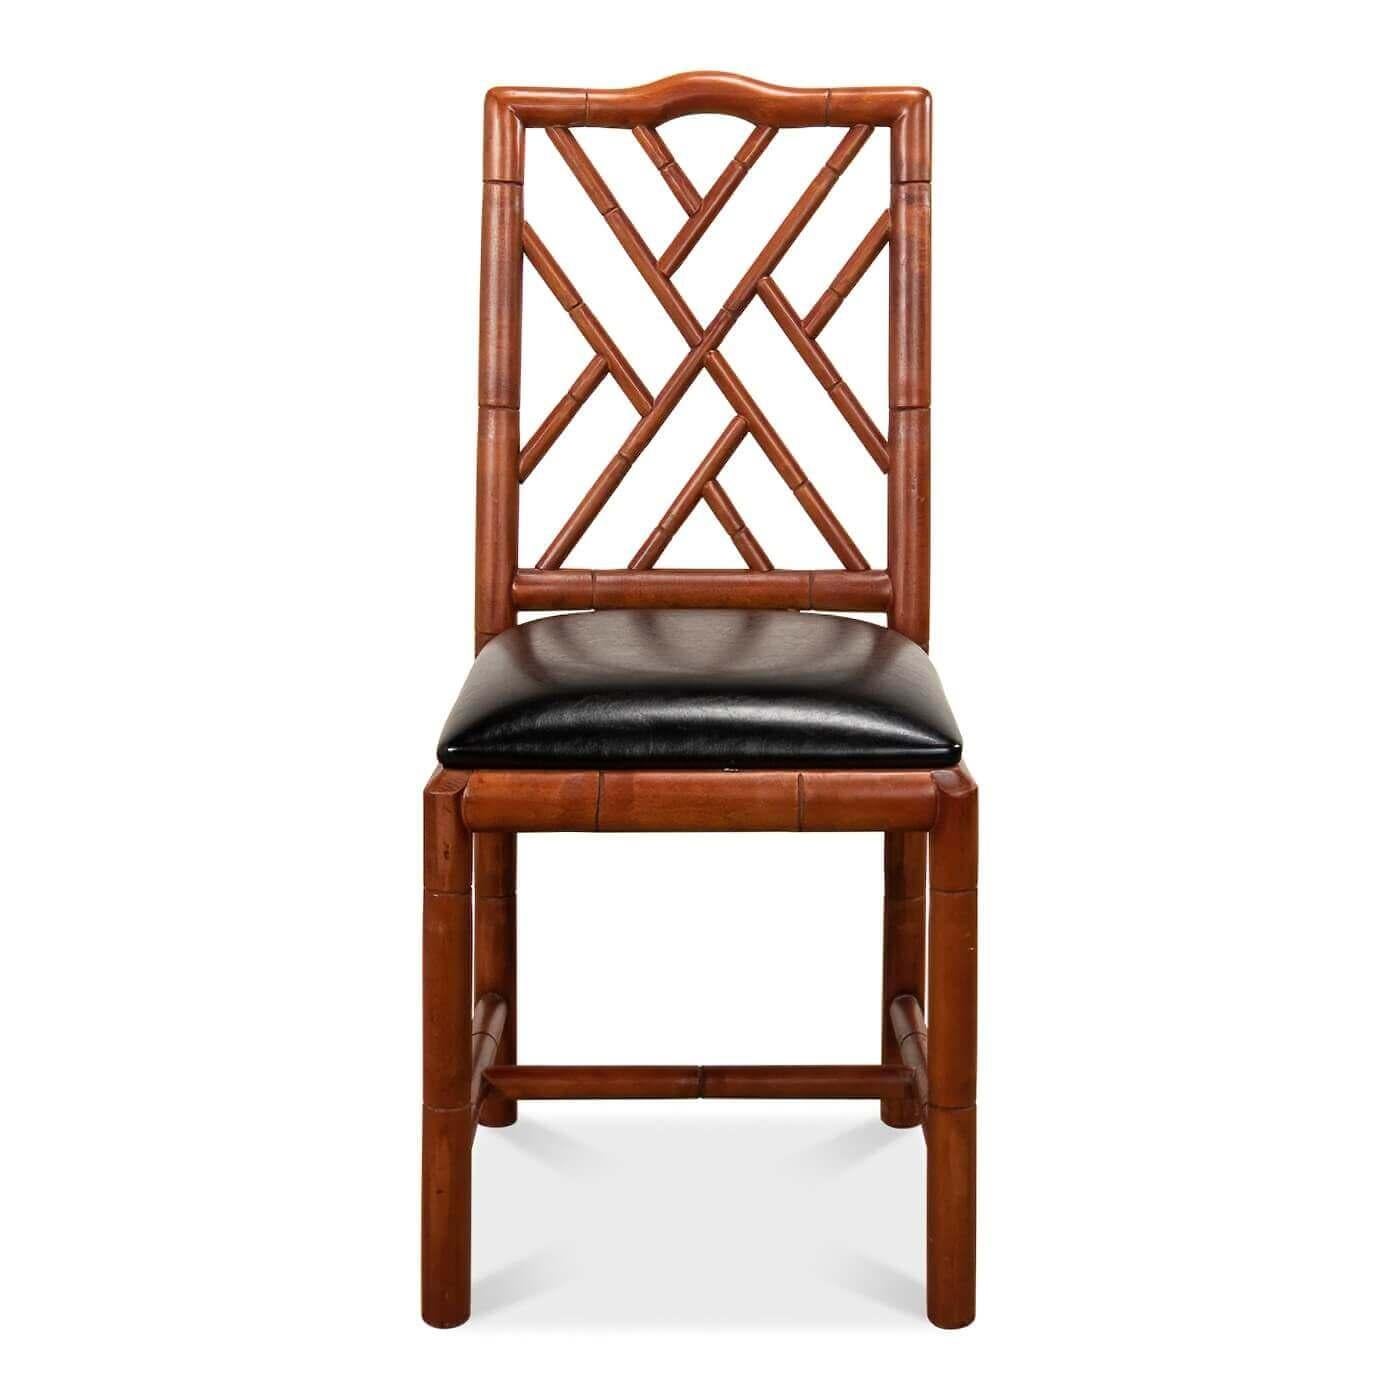 Brighton Faux Bamboo side chair. This hand-carved chair with a faux bamboo motif is inspired by pieces made for George IV, the Prince Regent, in the 1920s. It is shown in our antique teak finish with a faux leather seat. 

Dimensions: 17